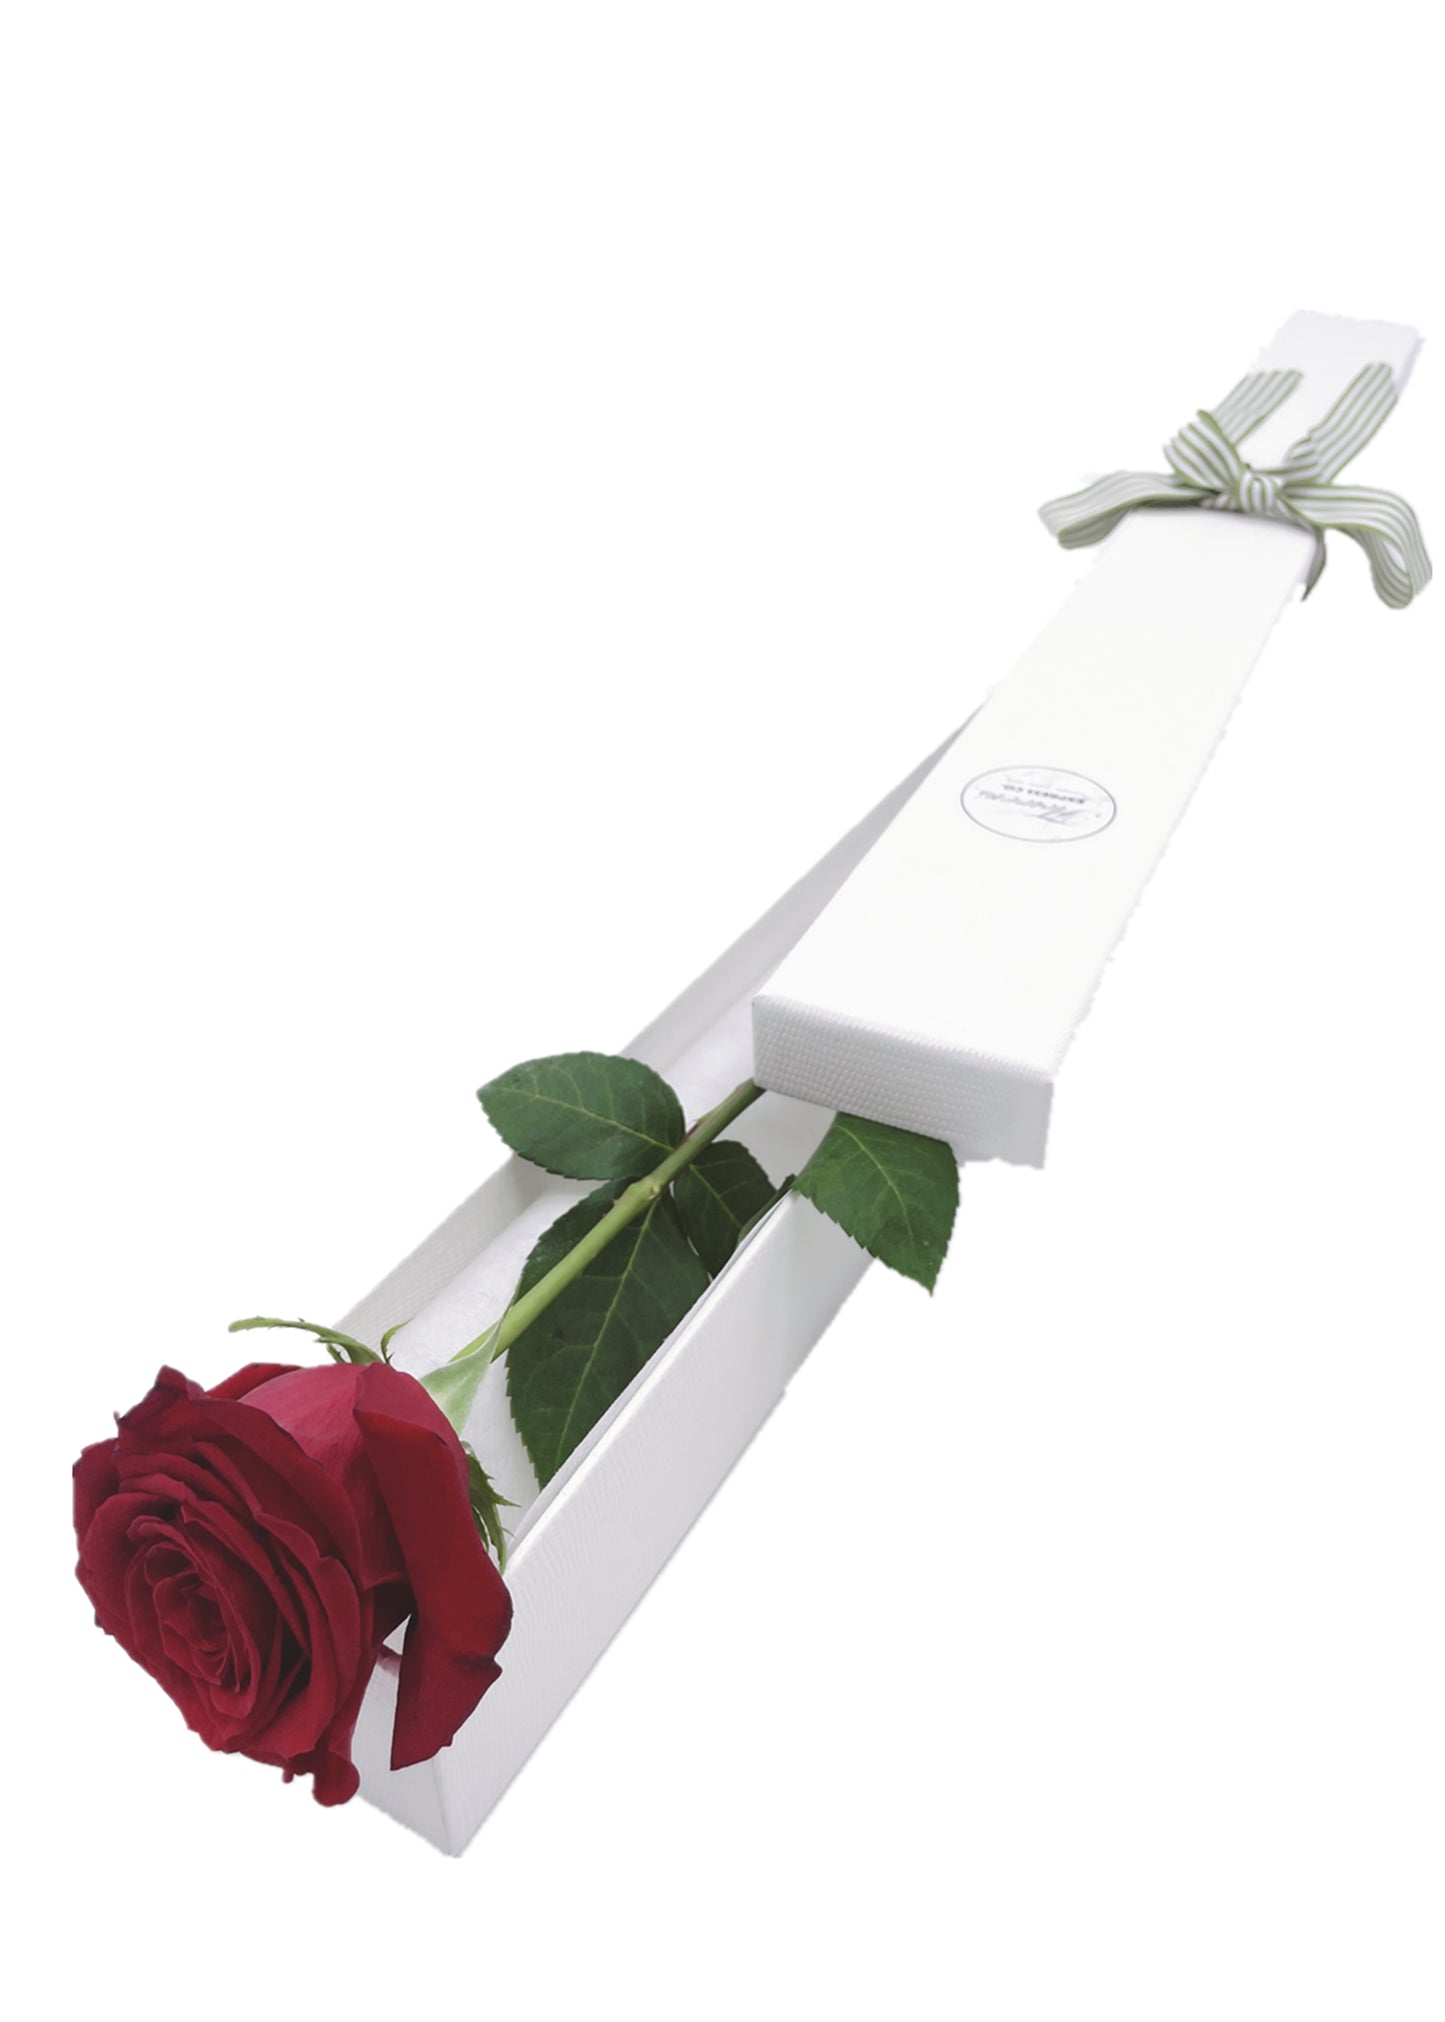 A luxurious white packaging box opens to reveal a stunning red rose; its petals are rich and velvety, and the green ribbon adds a touch of elegance,shot by Flowers Express Co in Melbourne.